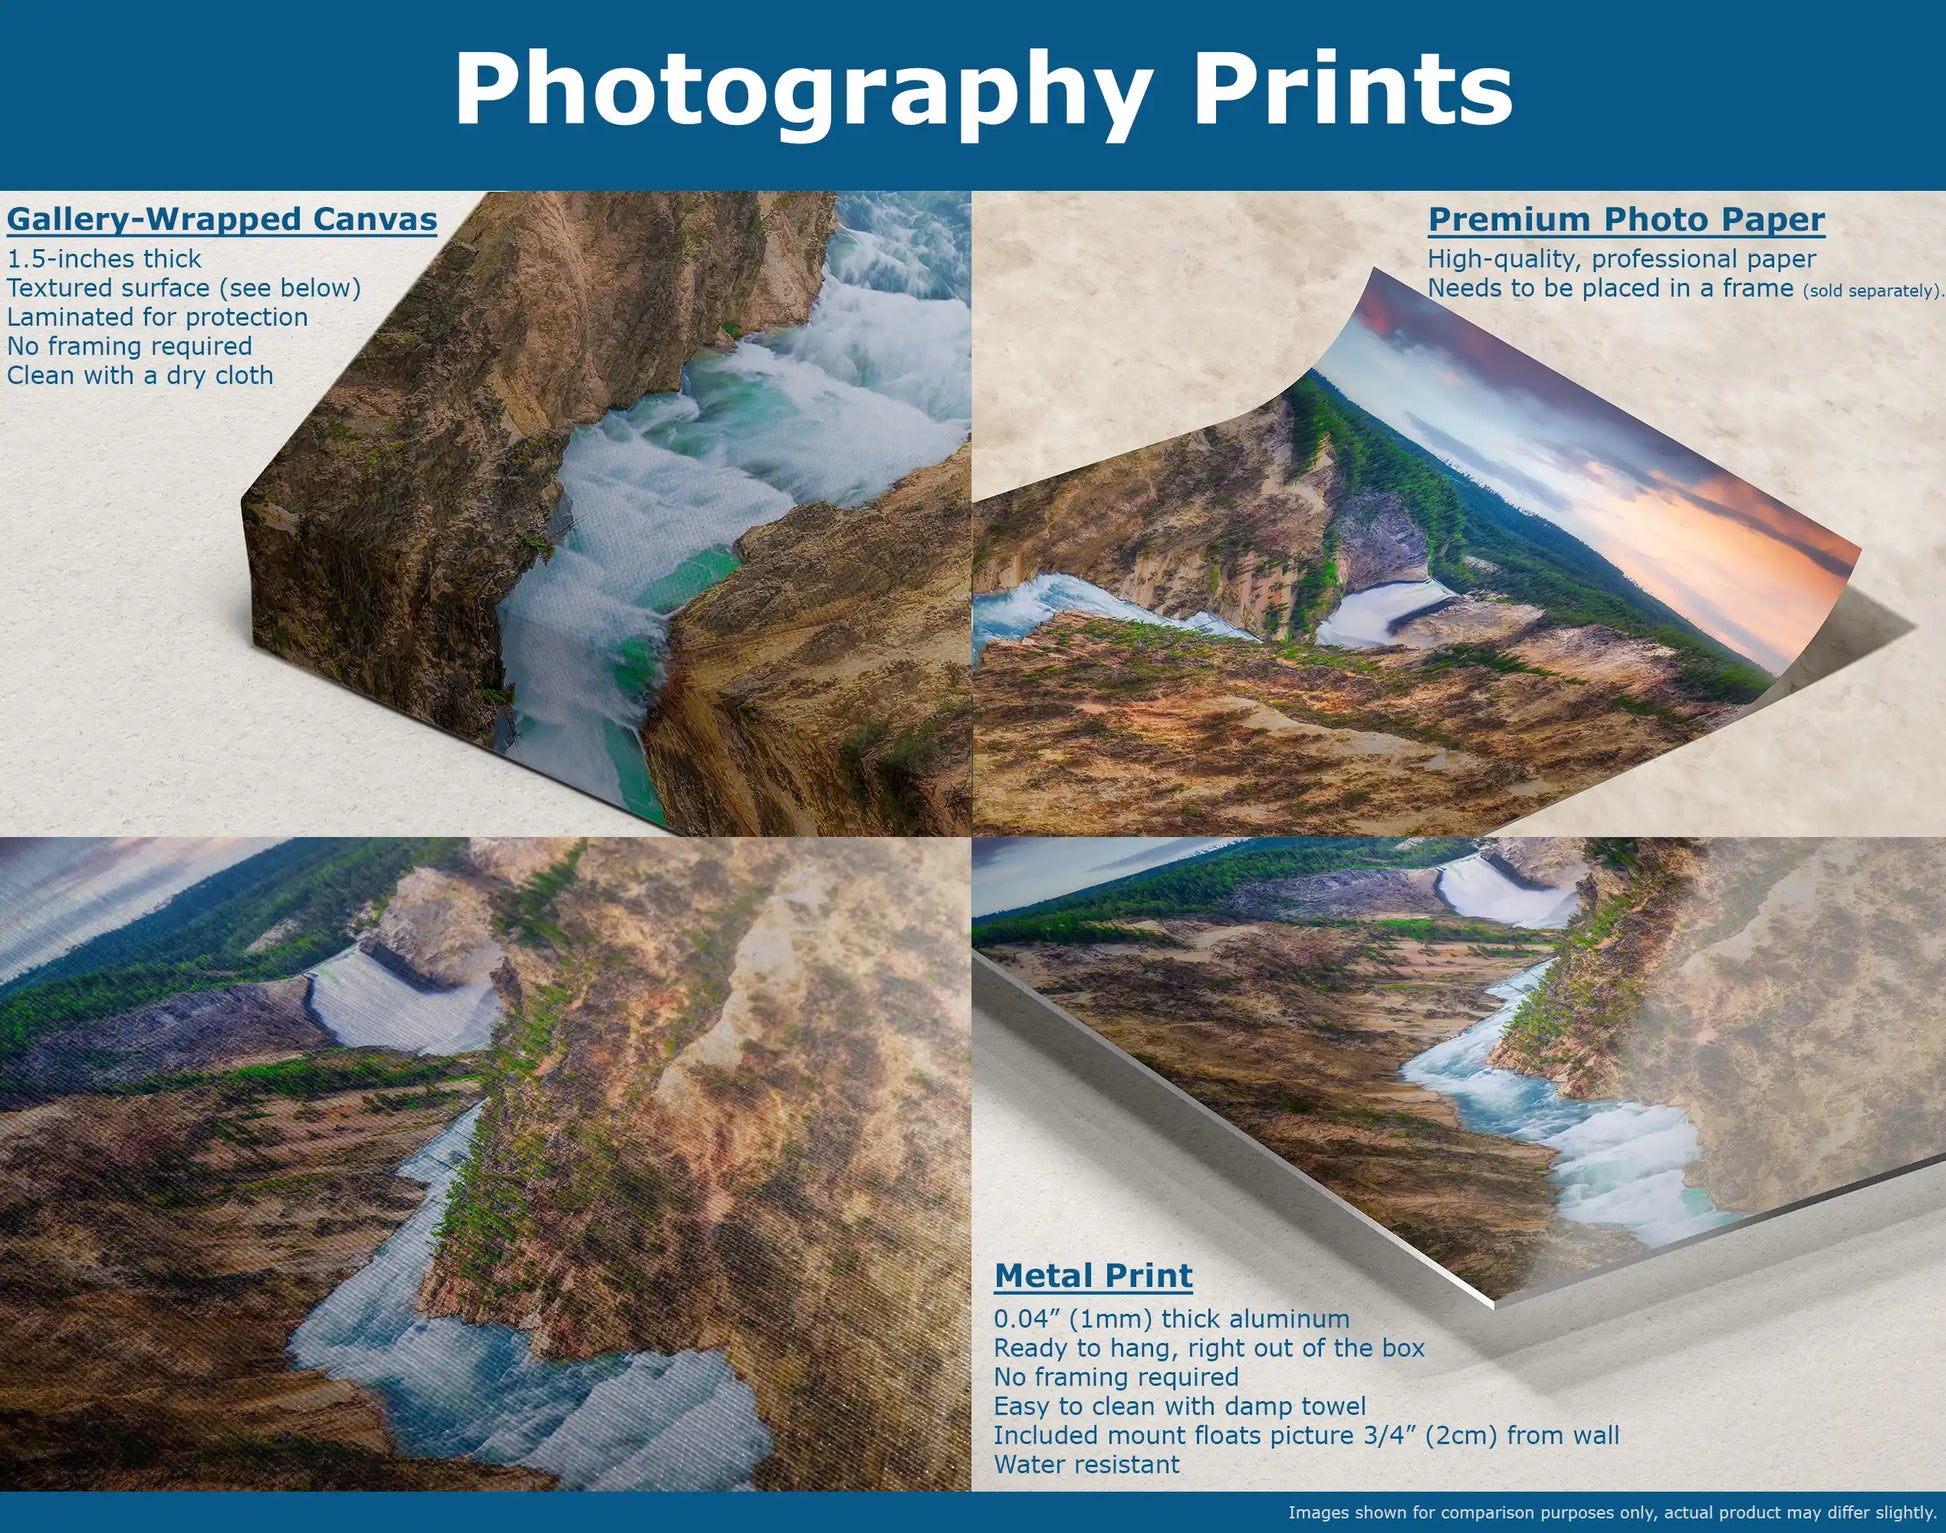 An explainer graphic comparing different print mediums of a photograph featuring a wide view of Lower Yellowstone Falls at sunset.